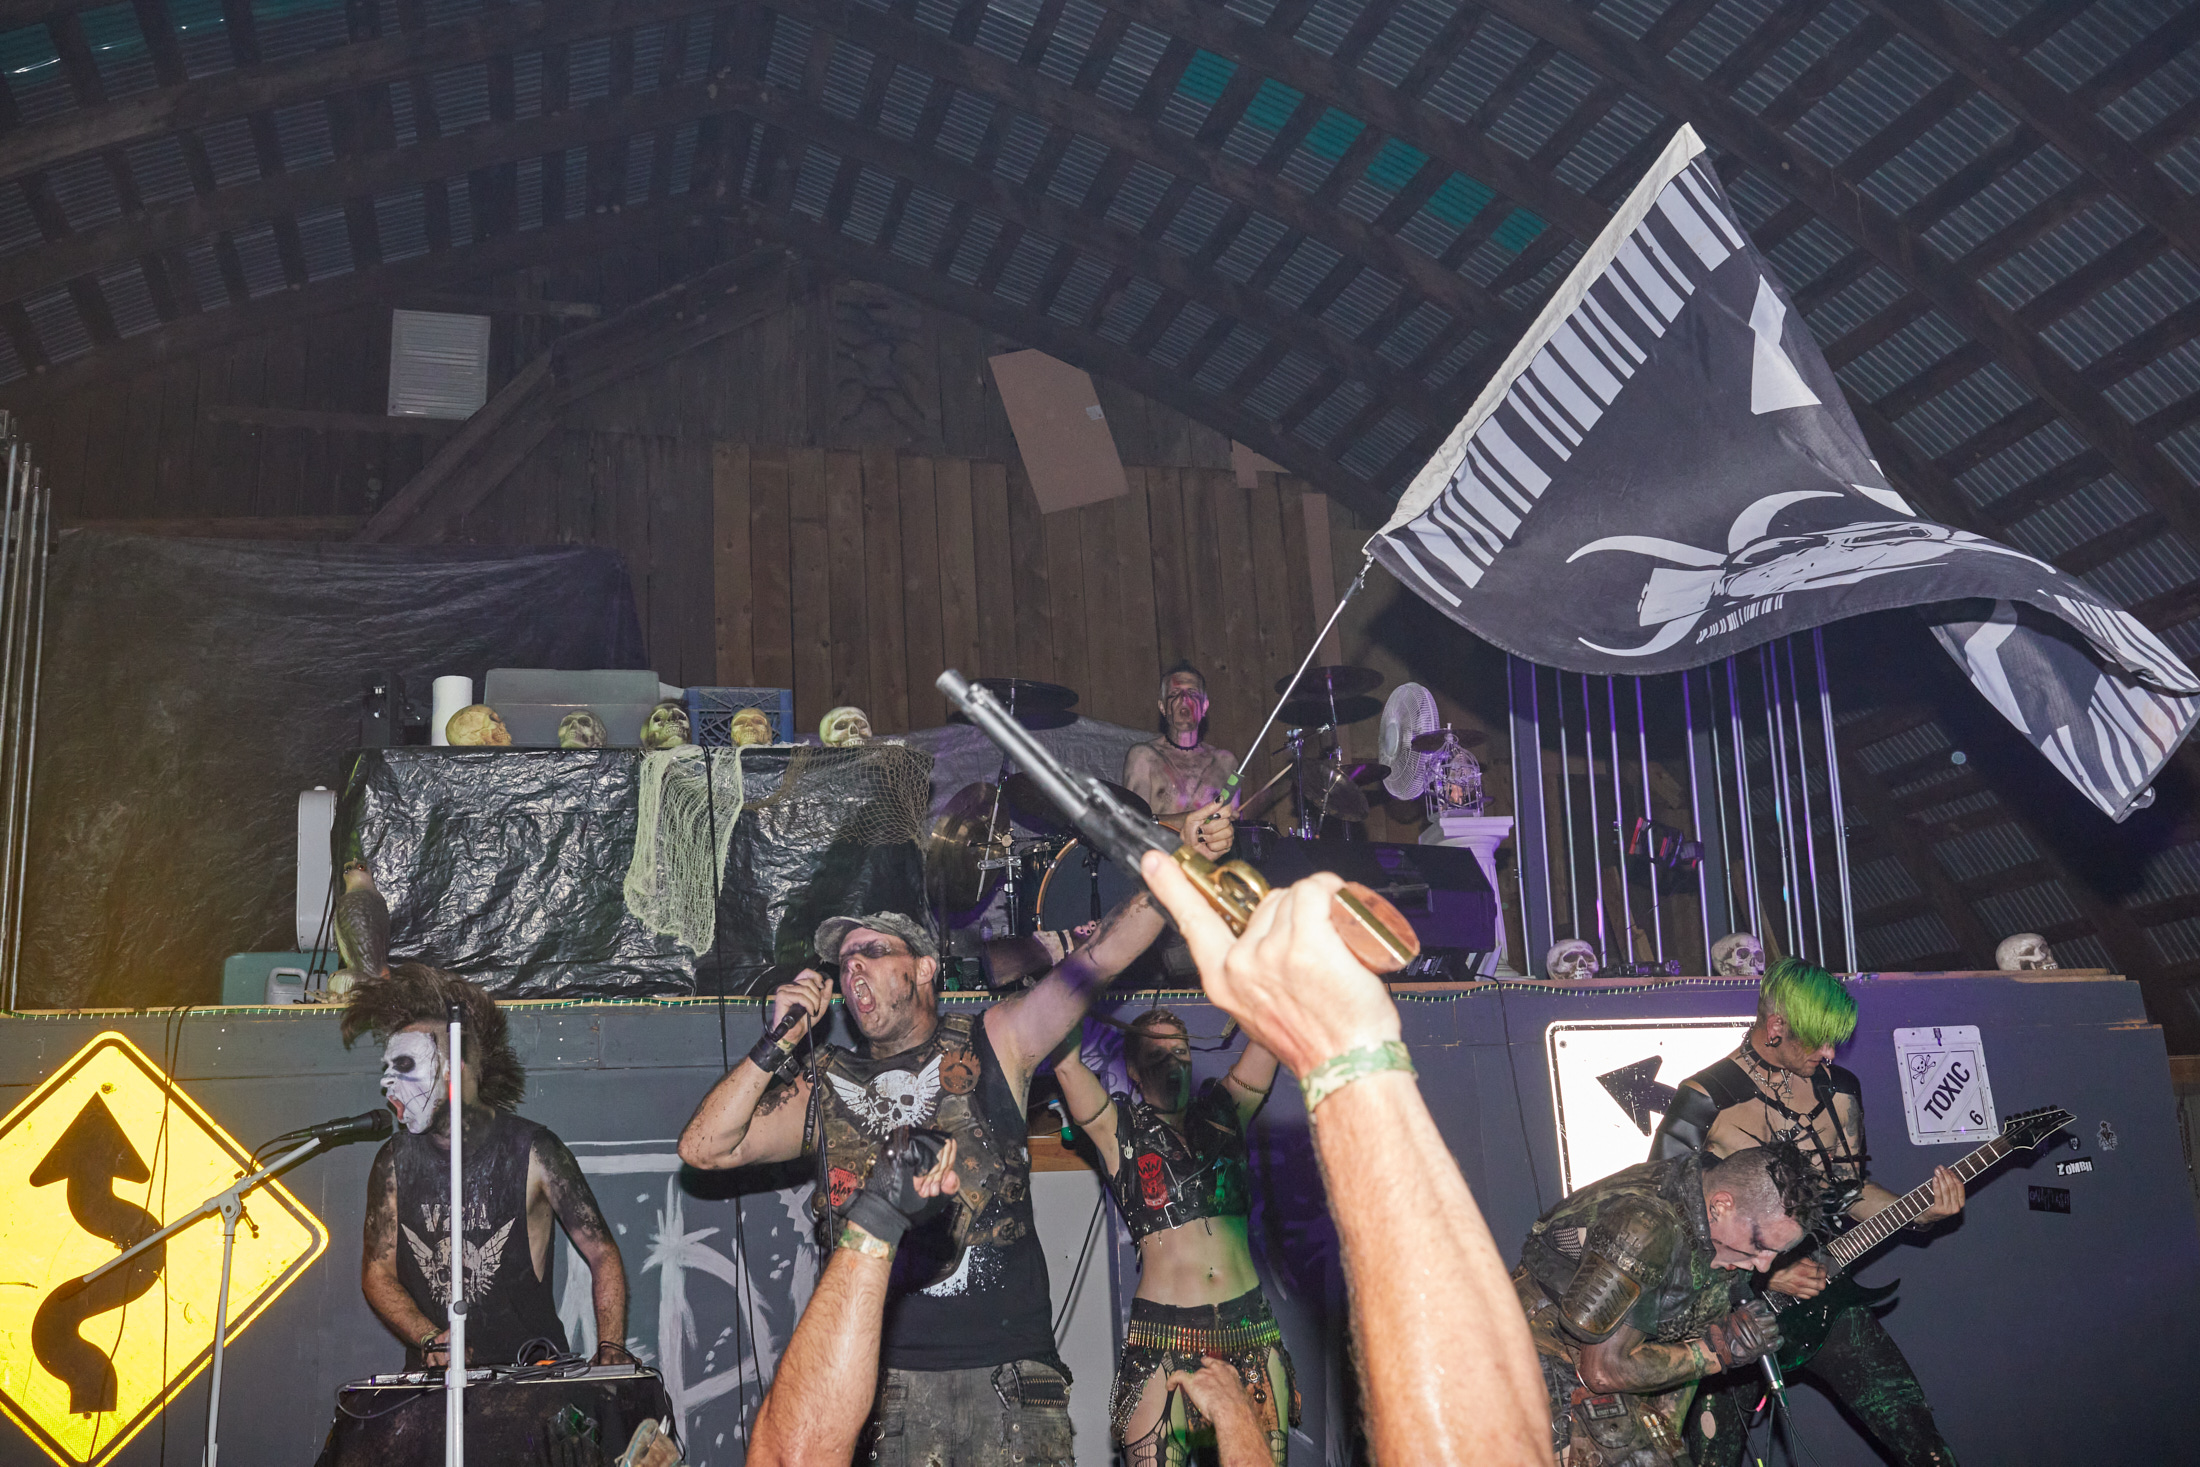 A band plays on a stage inside a barn, an attendee's prop gun is raised in the foreground